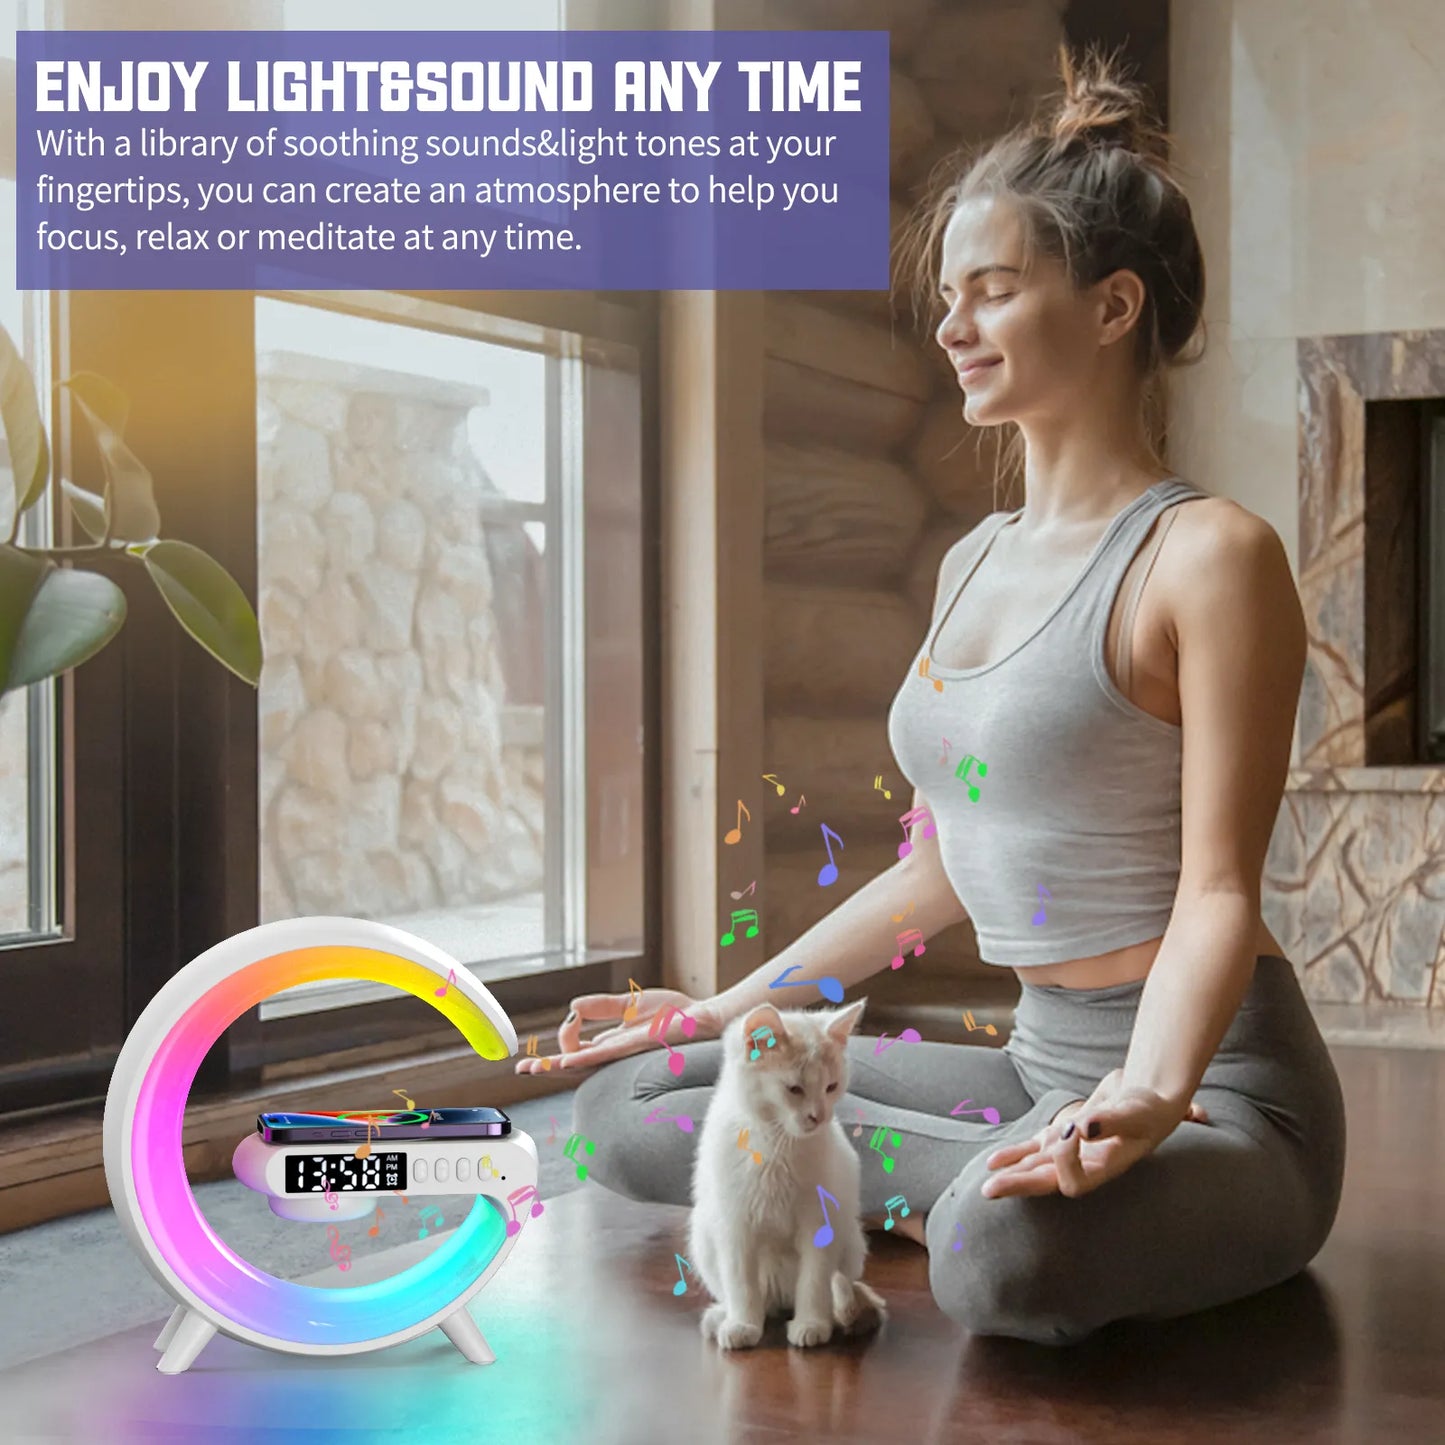 Led Smart Lamp with Alarm Clock, Bluetooth Speaker & Wireless Charging